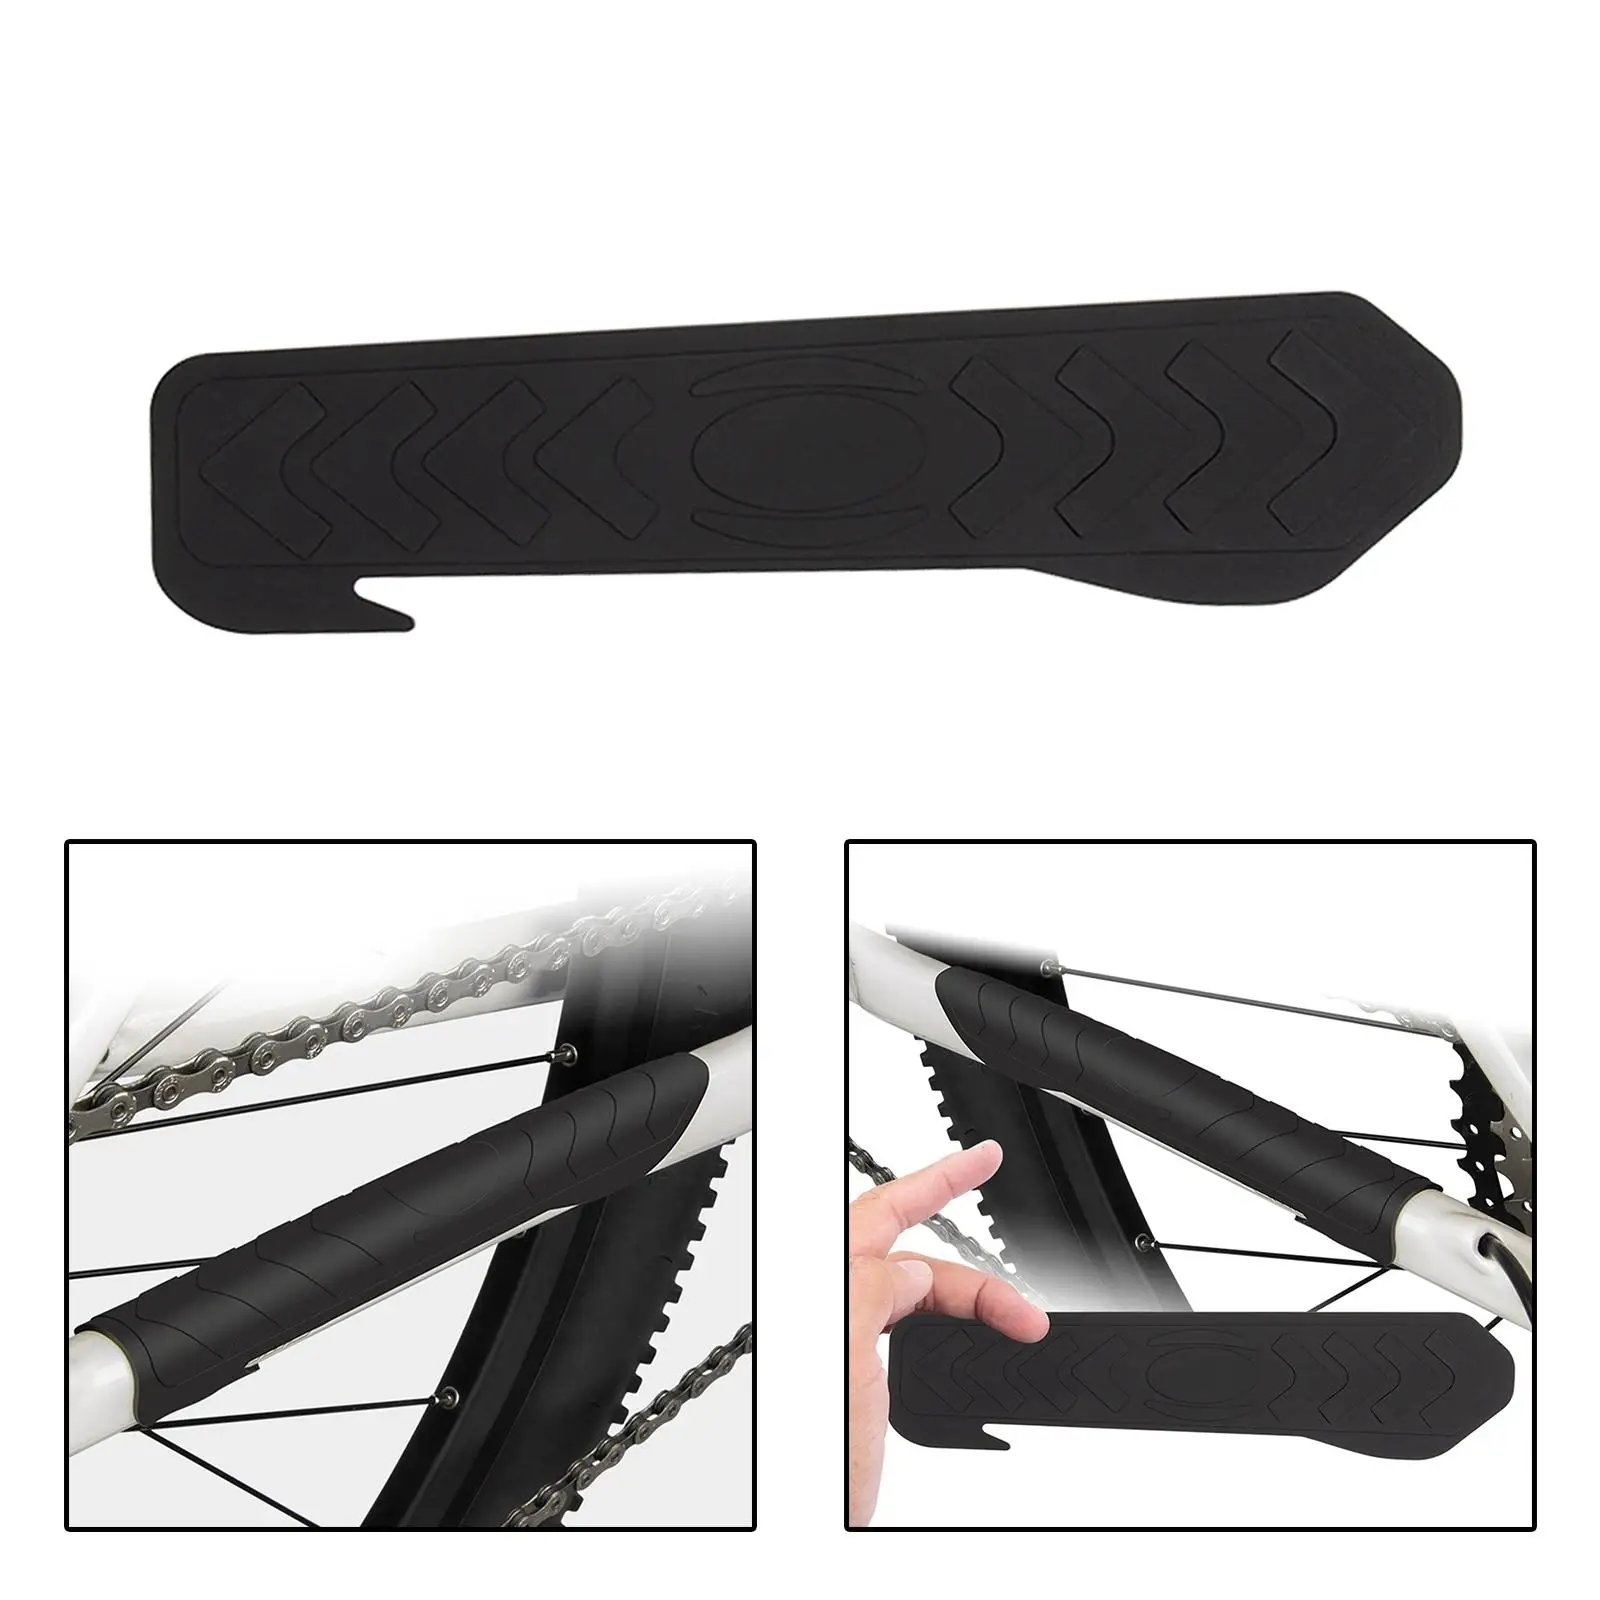 Bike Chainstay Protector, Bicycle Chain Stay Frame Guards, Silicone Protective Chainstay Guard Pad for Mountain Bike